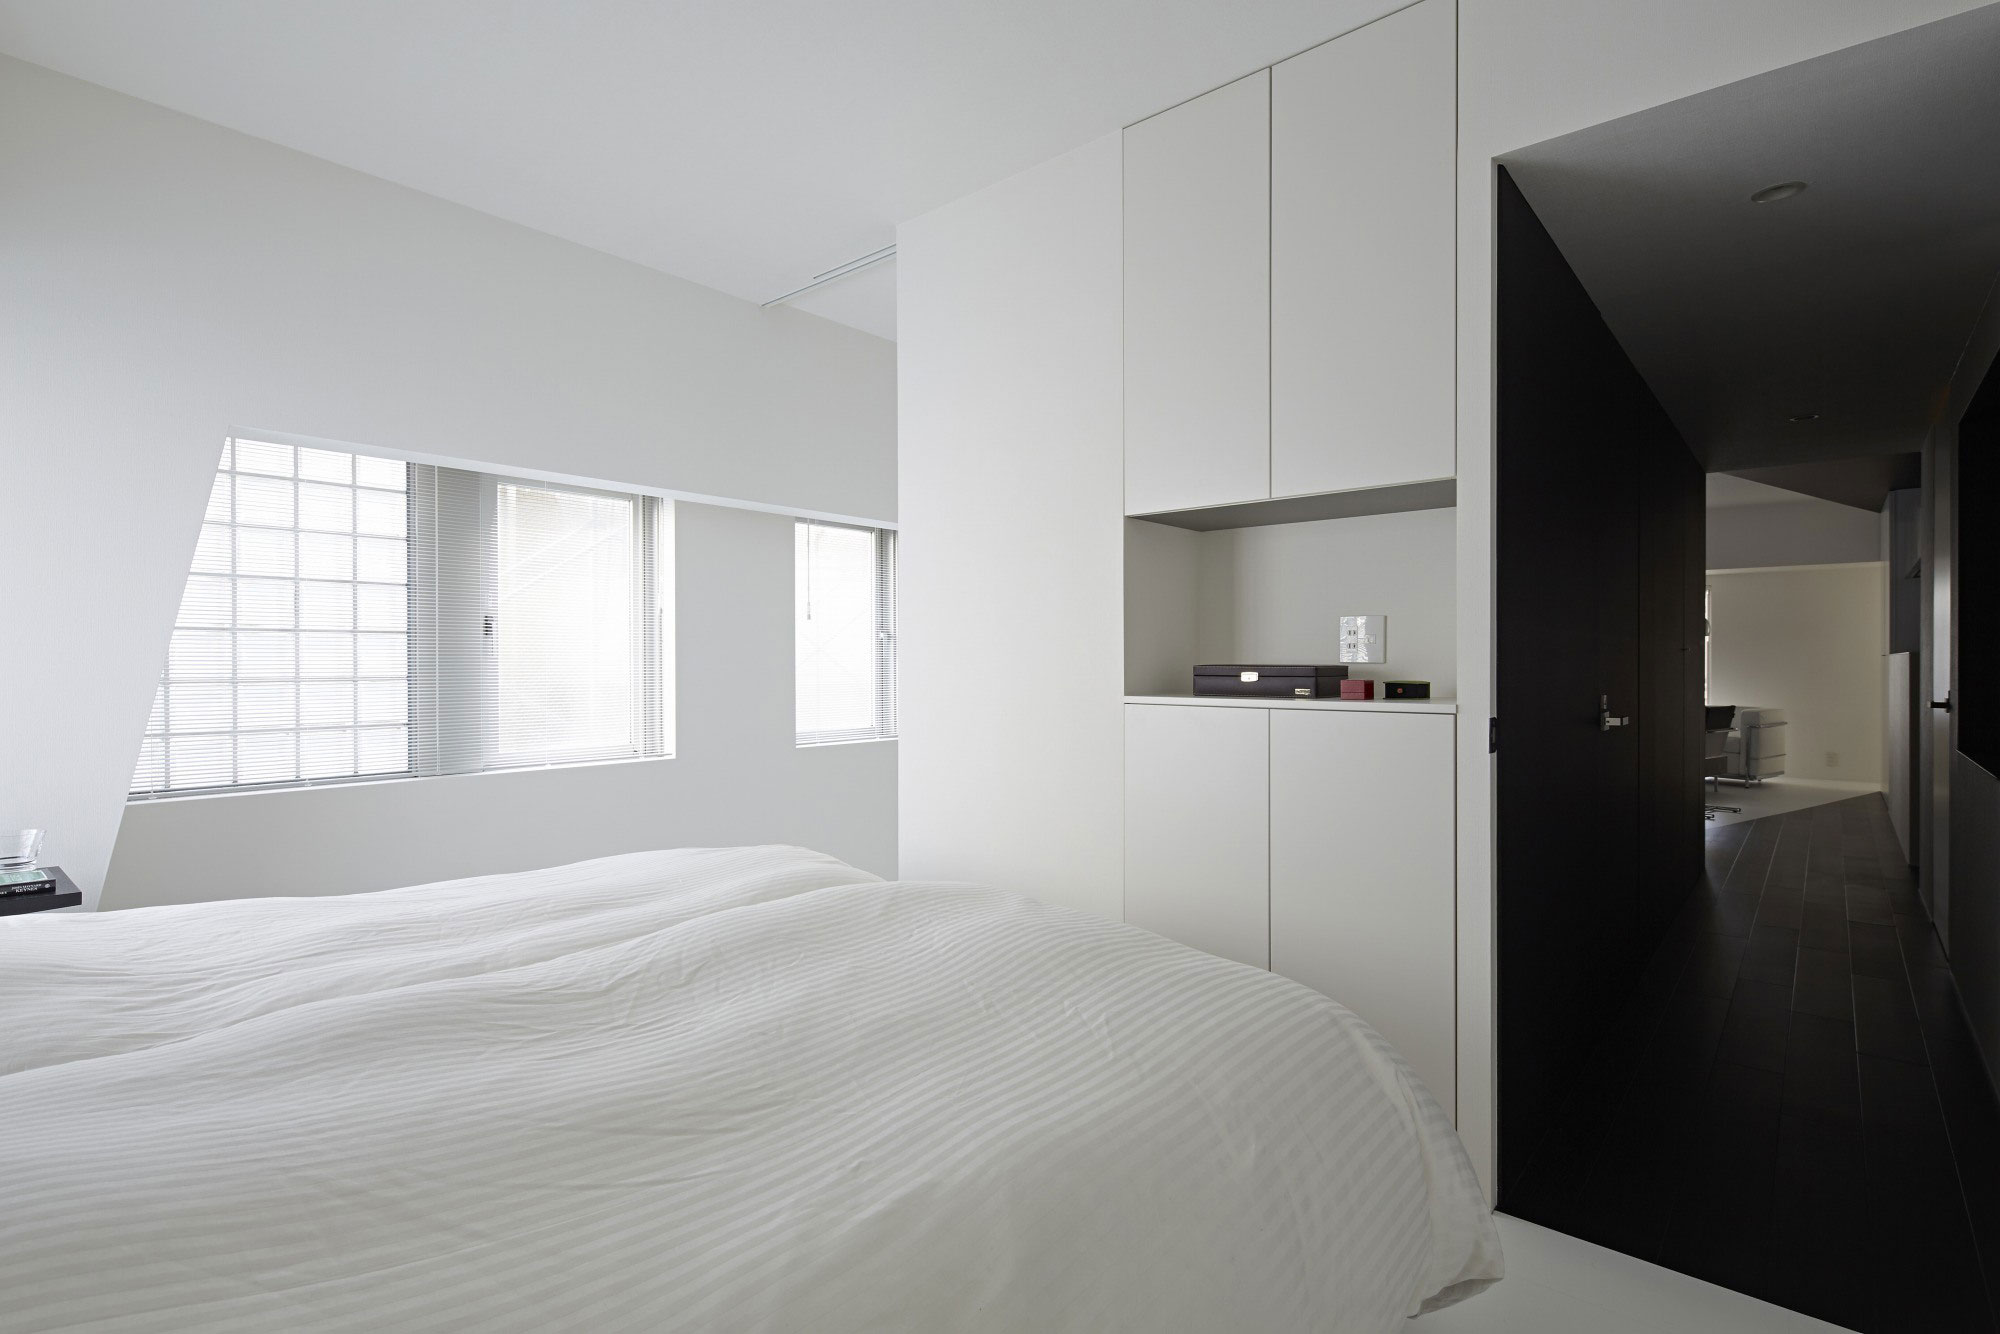 Room 407 Storage Clever Room 407 Master Bedroom Storage Idea Involving Floor To Ceiling Cabinets And Wardrobe With Open Shelving Interior Design Elegant Monochrome Interior Idea For Classy Home Design